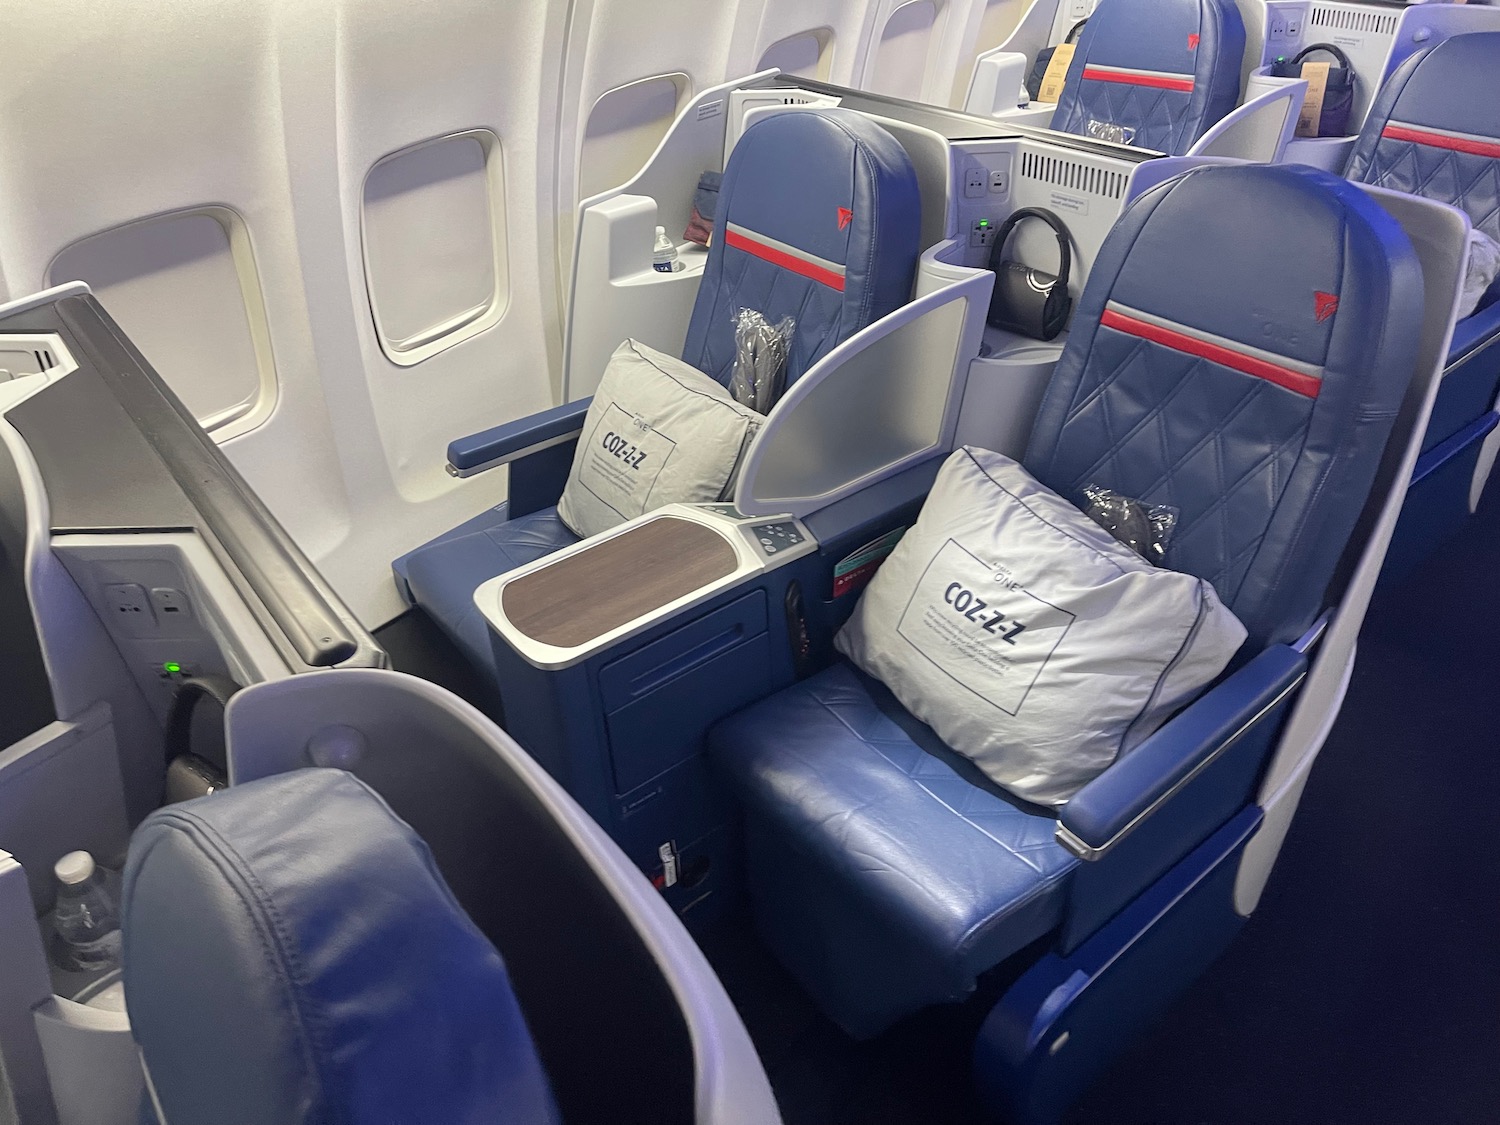 757-200 35F or 36F - both seemingly have great legroom. Which is ideal for  redeye sleep SFO-JFK? : r/delta